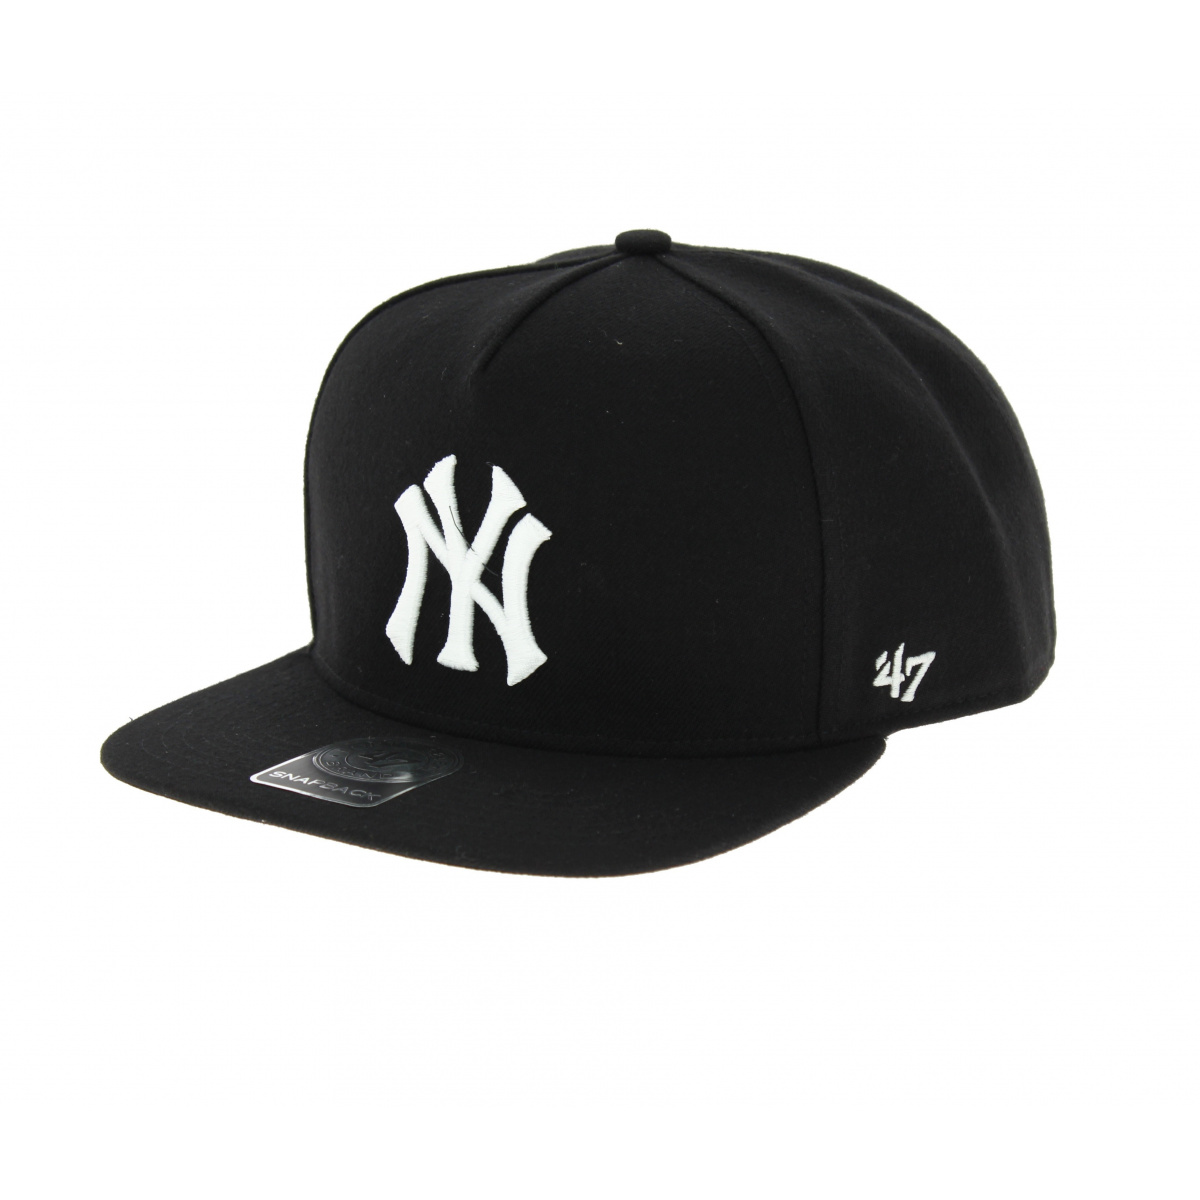 Casquette NY noire - 47 Brand - snapback Reference : 5627